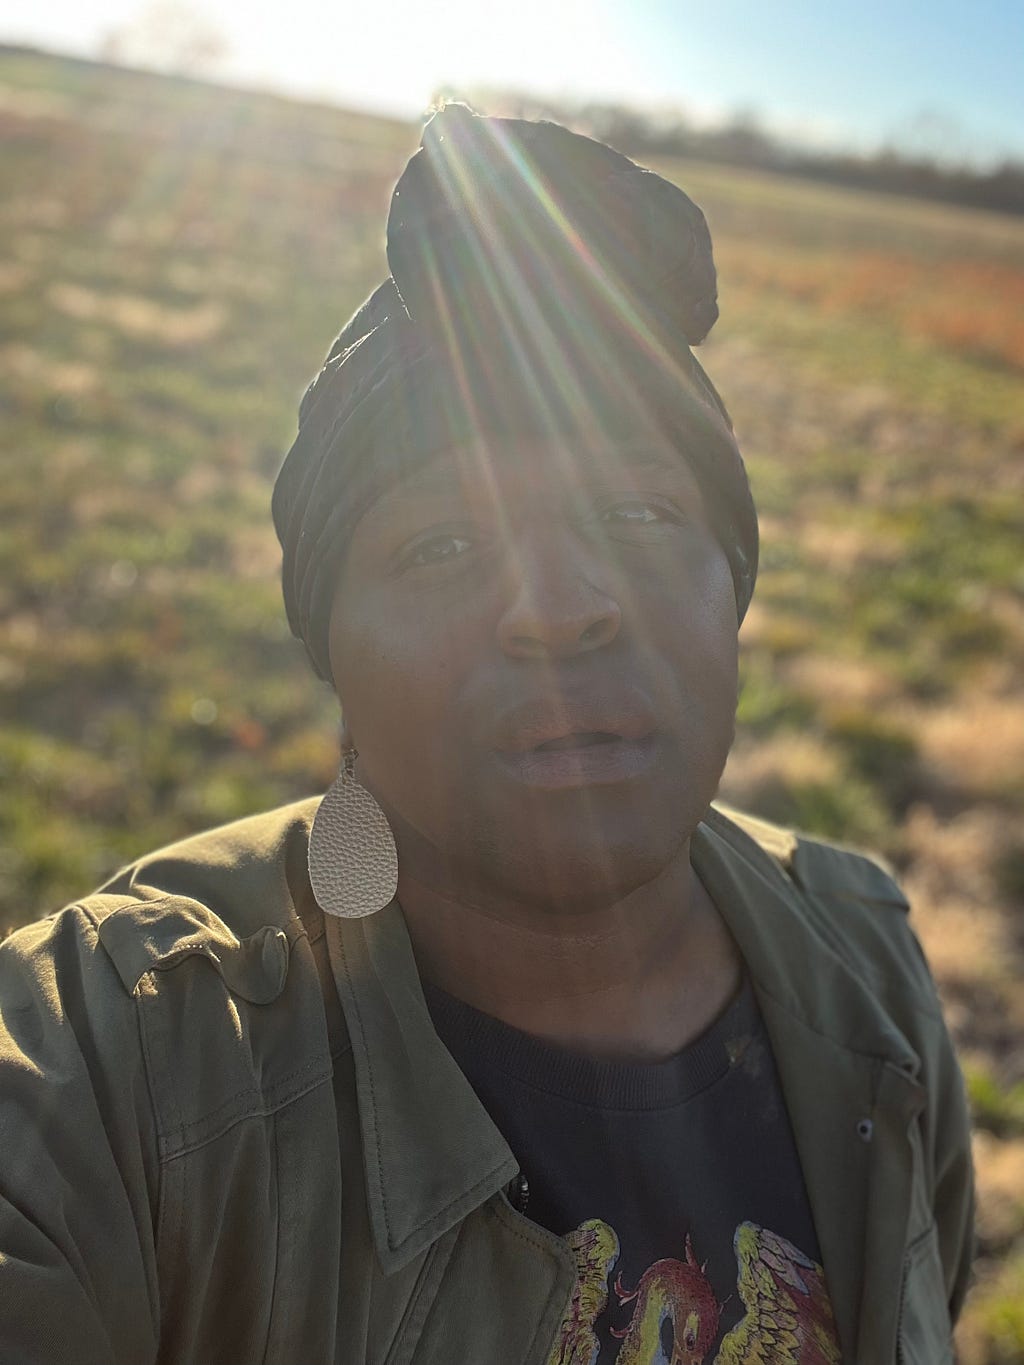 Black trans human standing in a field with the sun on their back. the human is breathless and knowing.